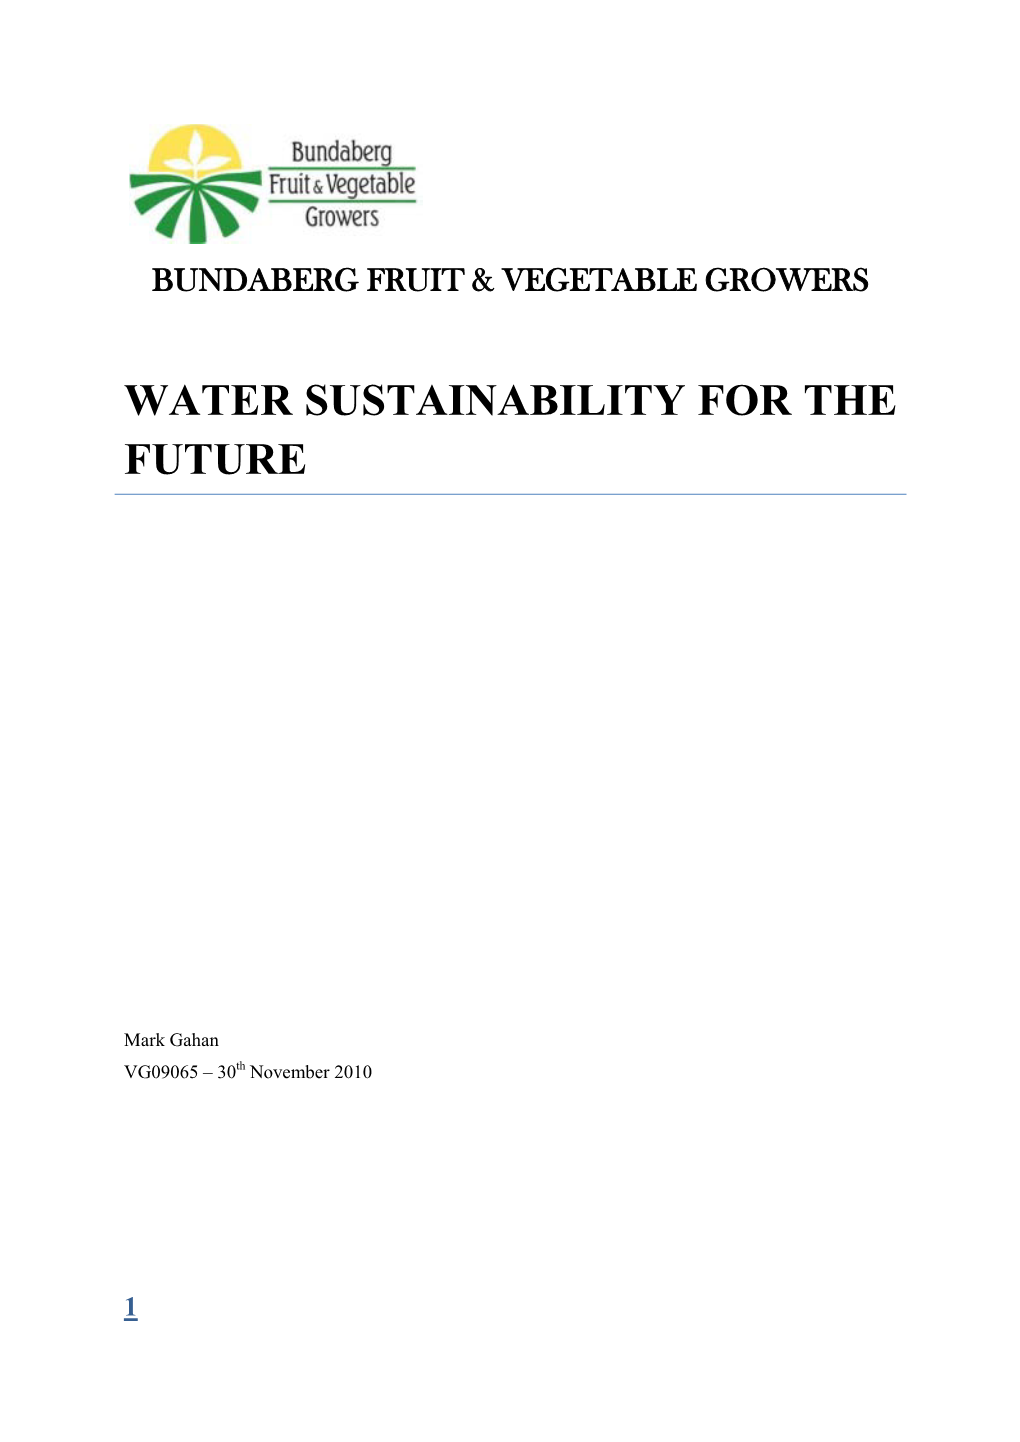 Water Sustainability for the Future